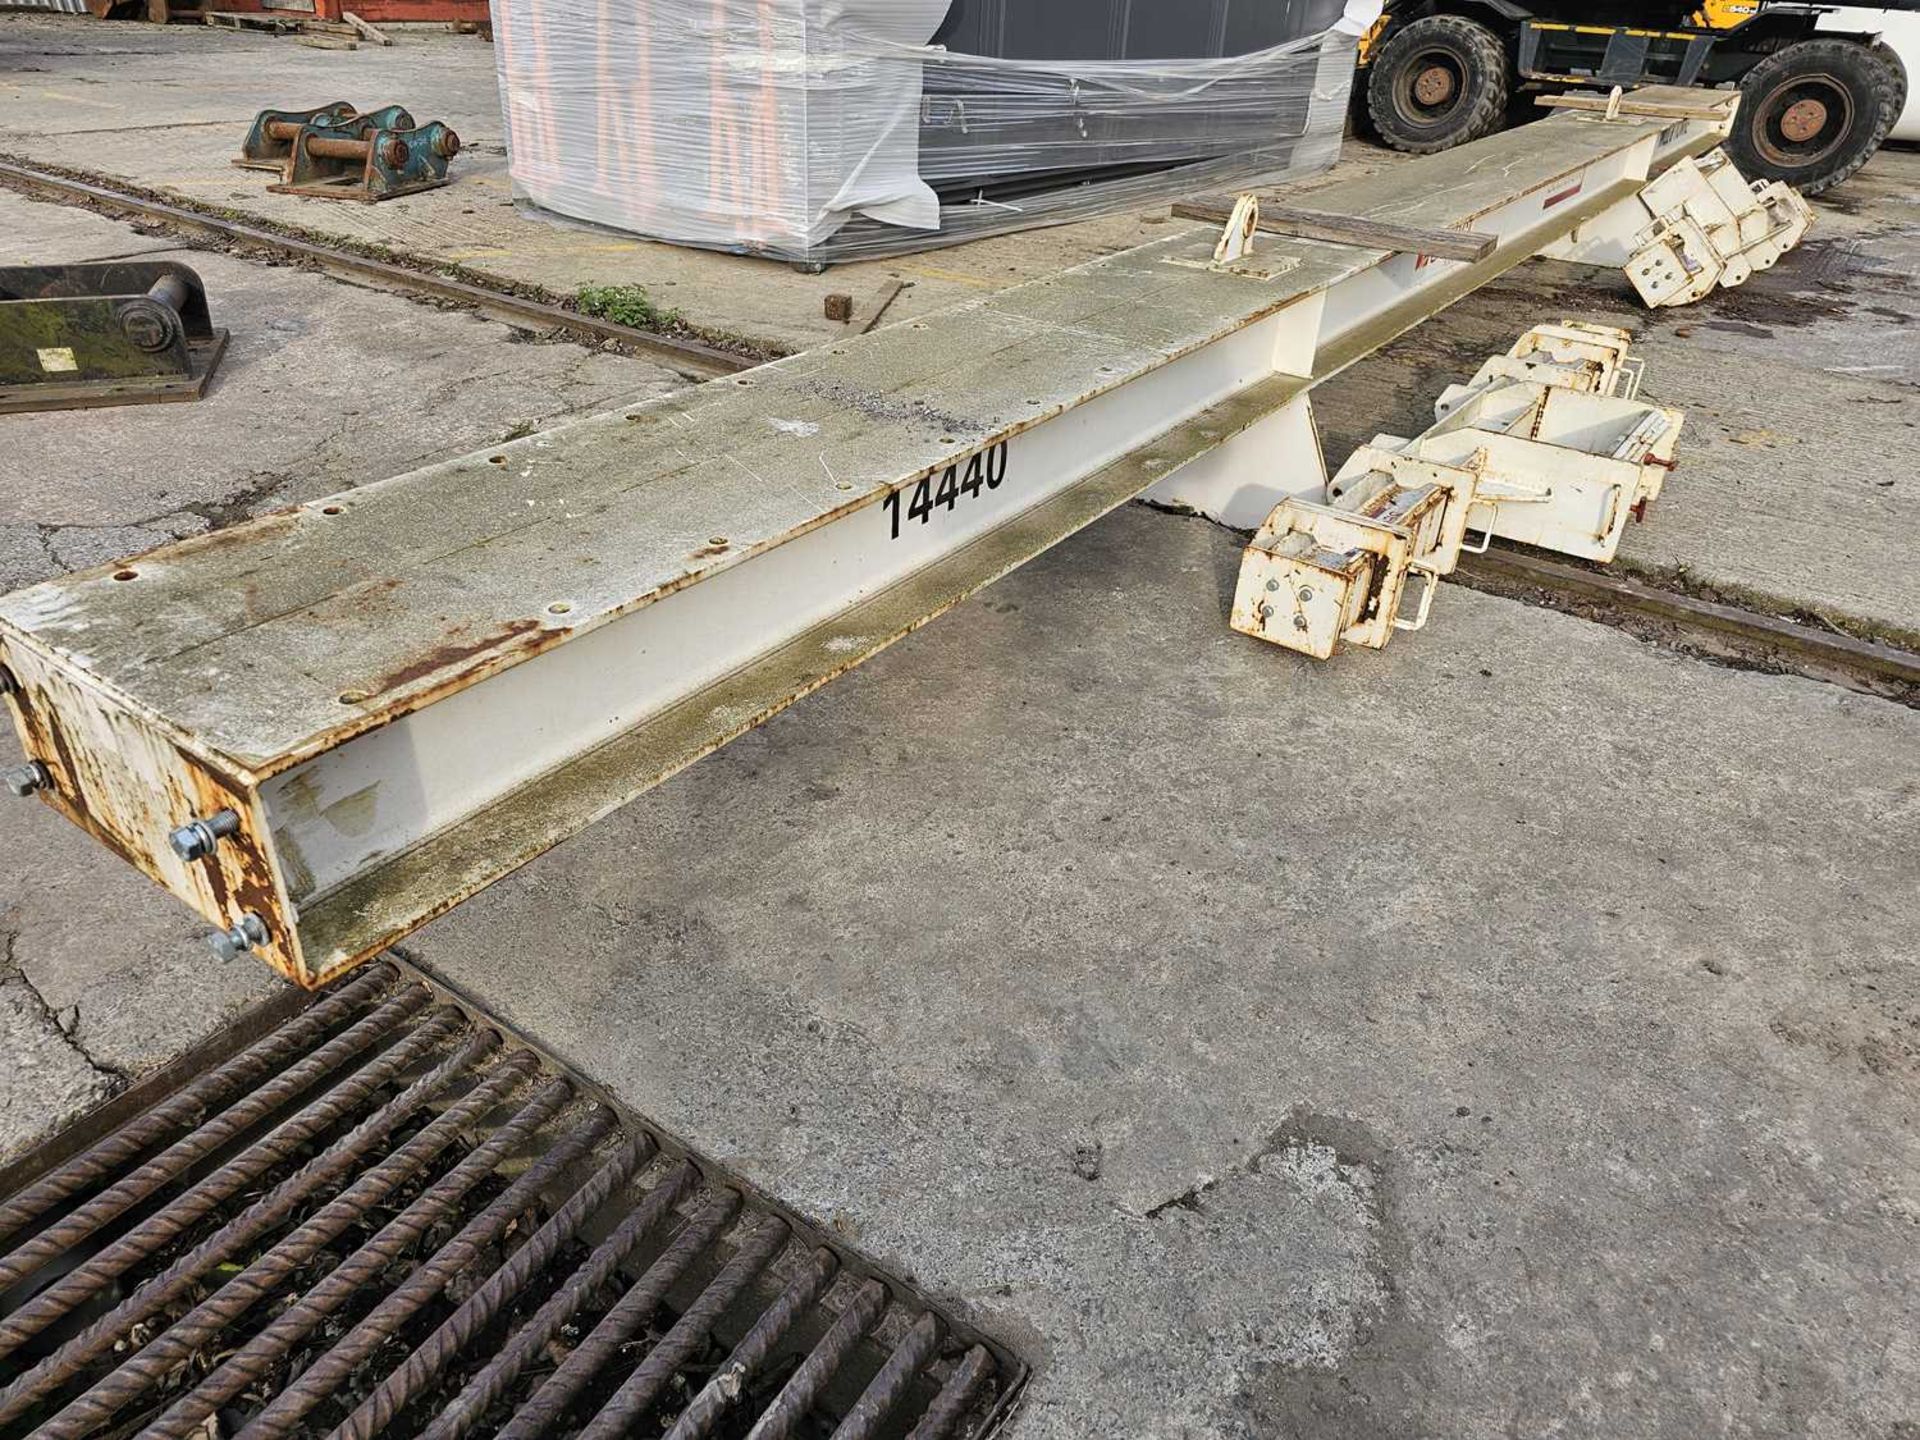 2019 Section Lift 10.65m x 2.5m Adjustable 8 Ton Spreader Beam - Image 2 of 7